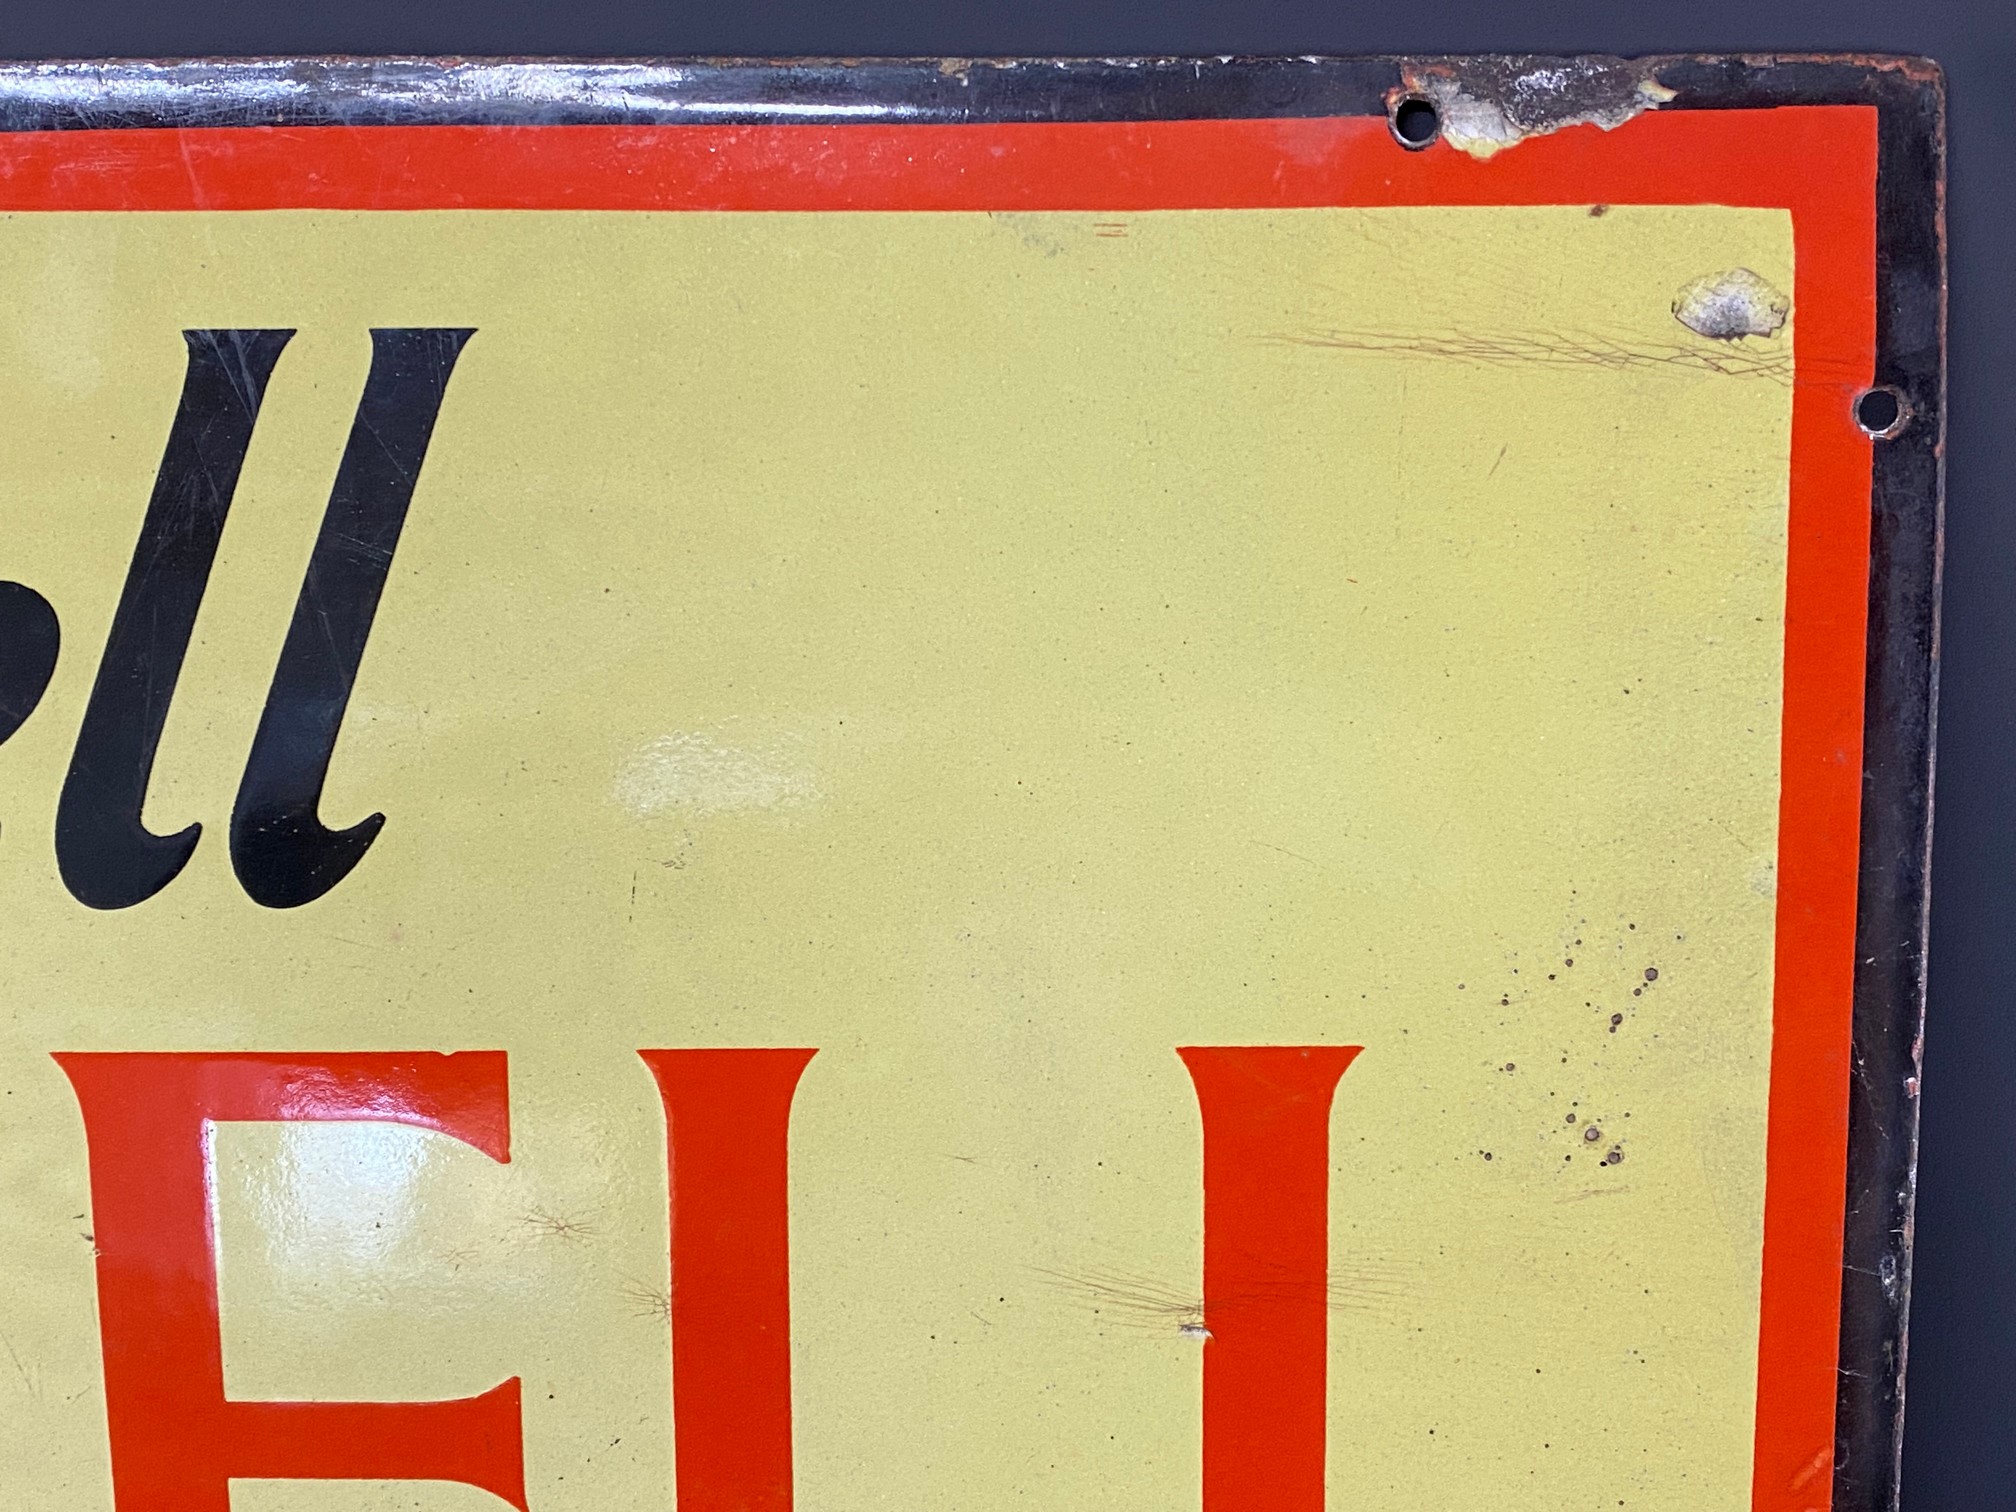 A Shell Lubricating Oils 'Every Drop Tells' pictorial enamel sign in very good condition, 24 x 36". - Image 3 of 7